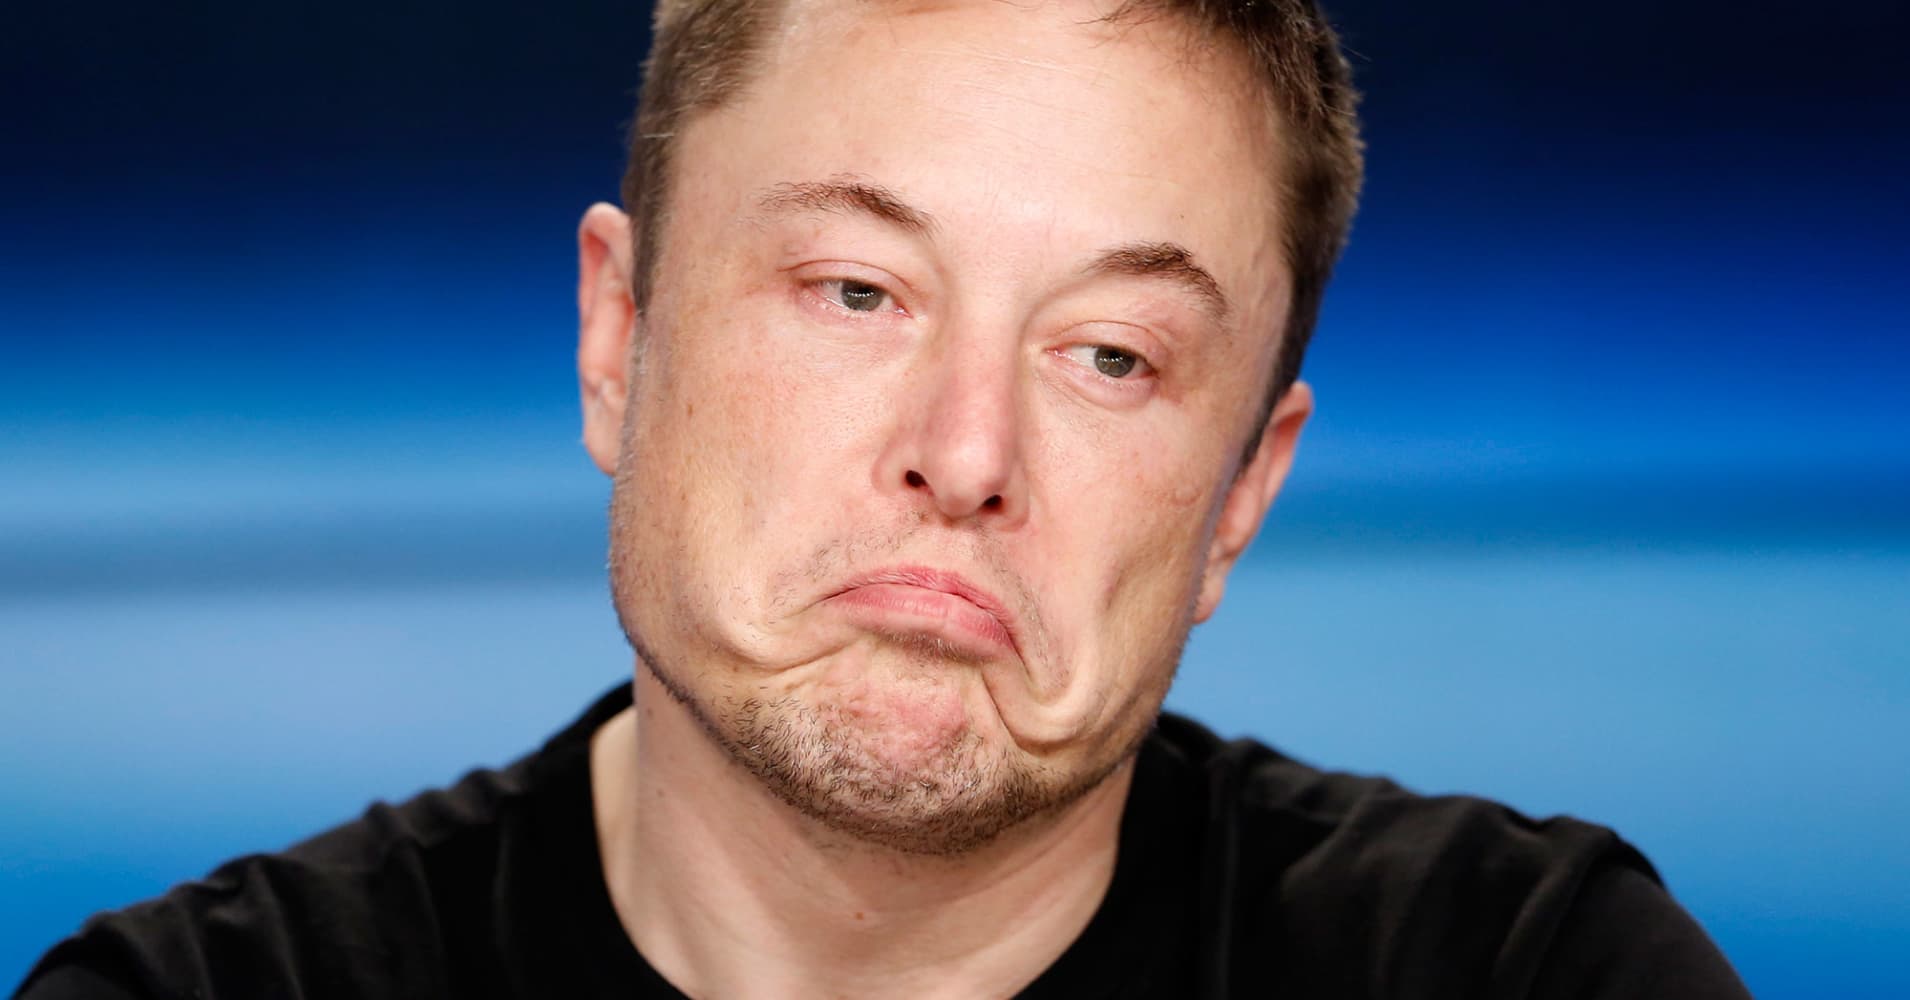 SpaceX founder and Tesla CEO Elon Musk.